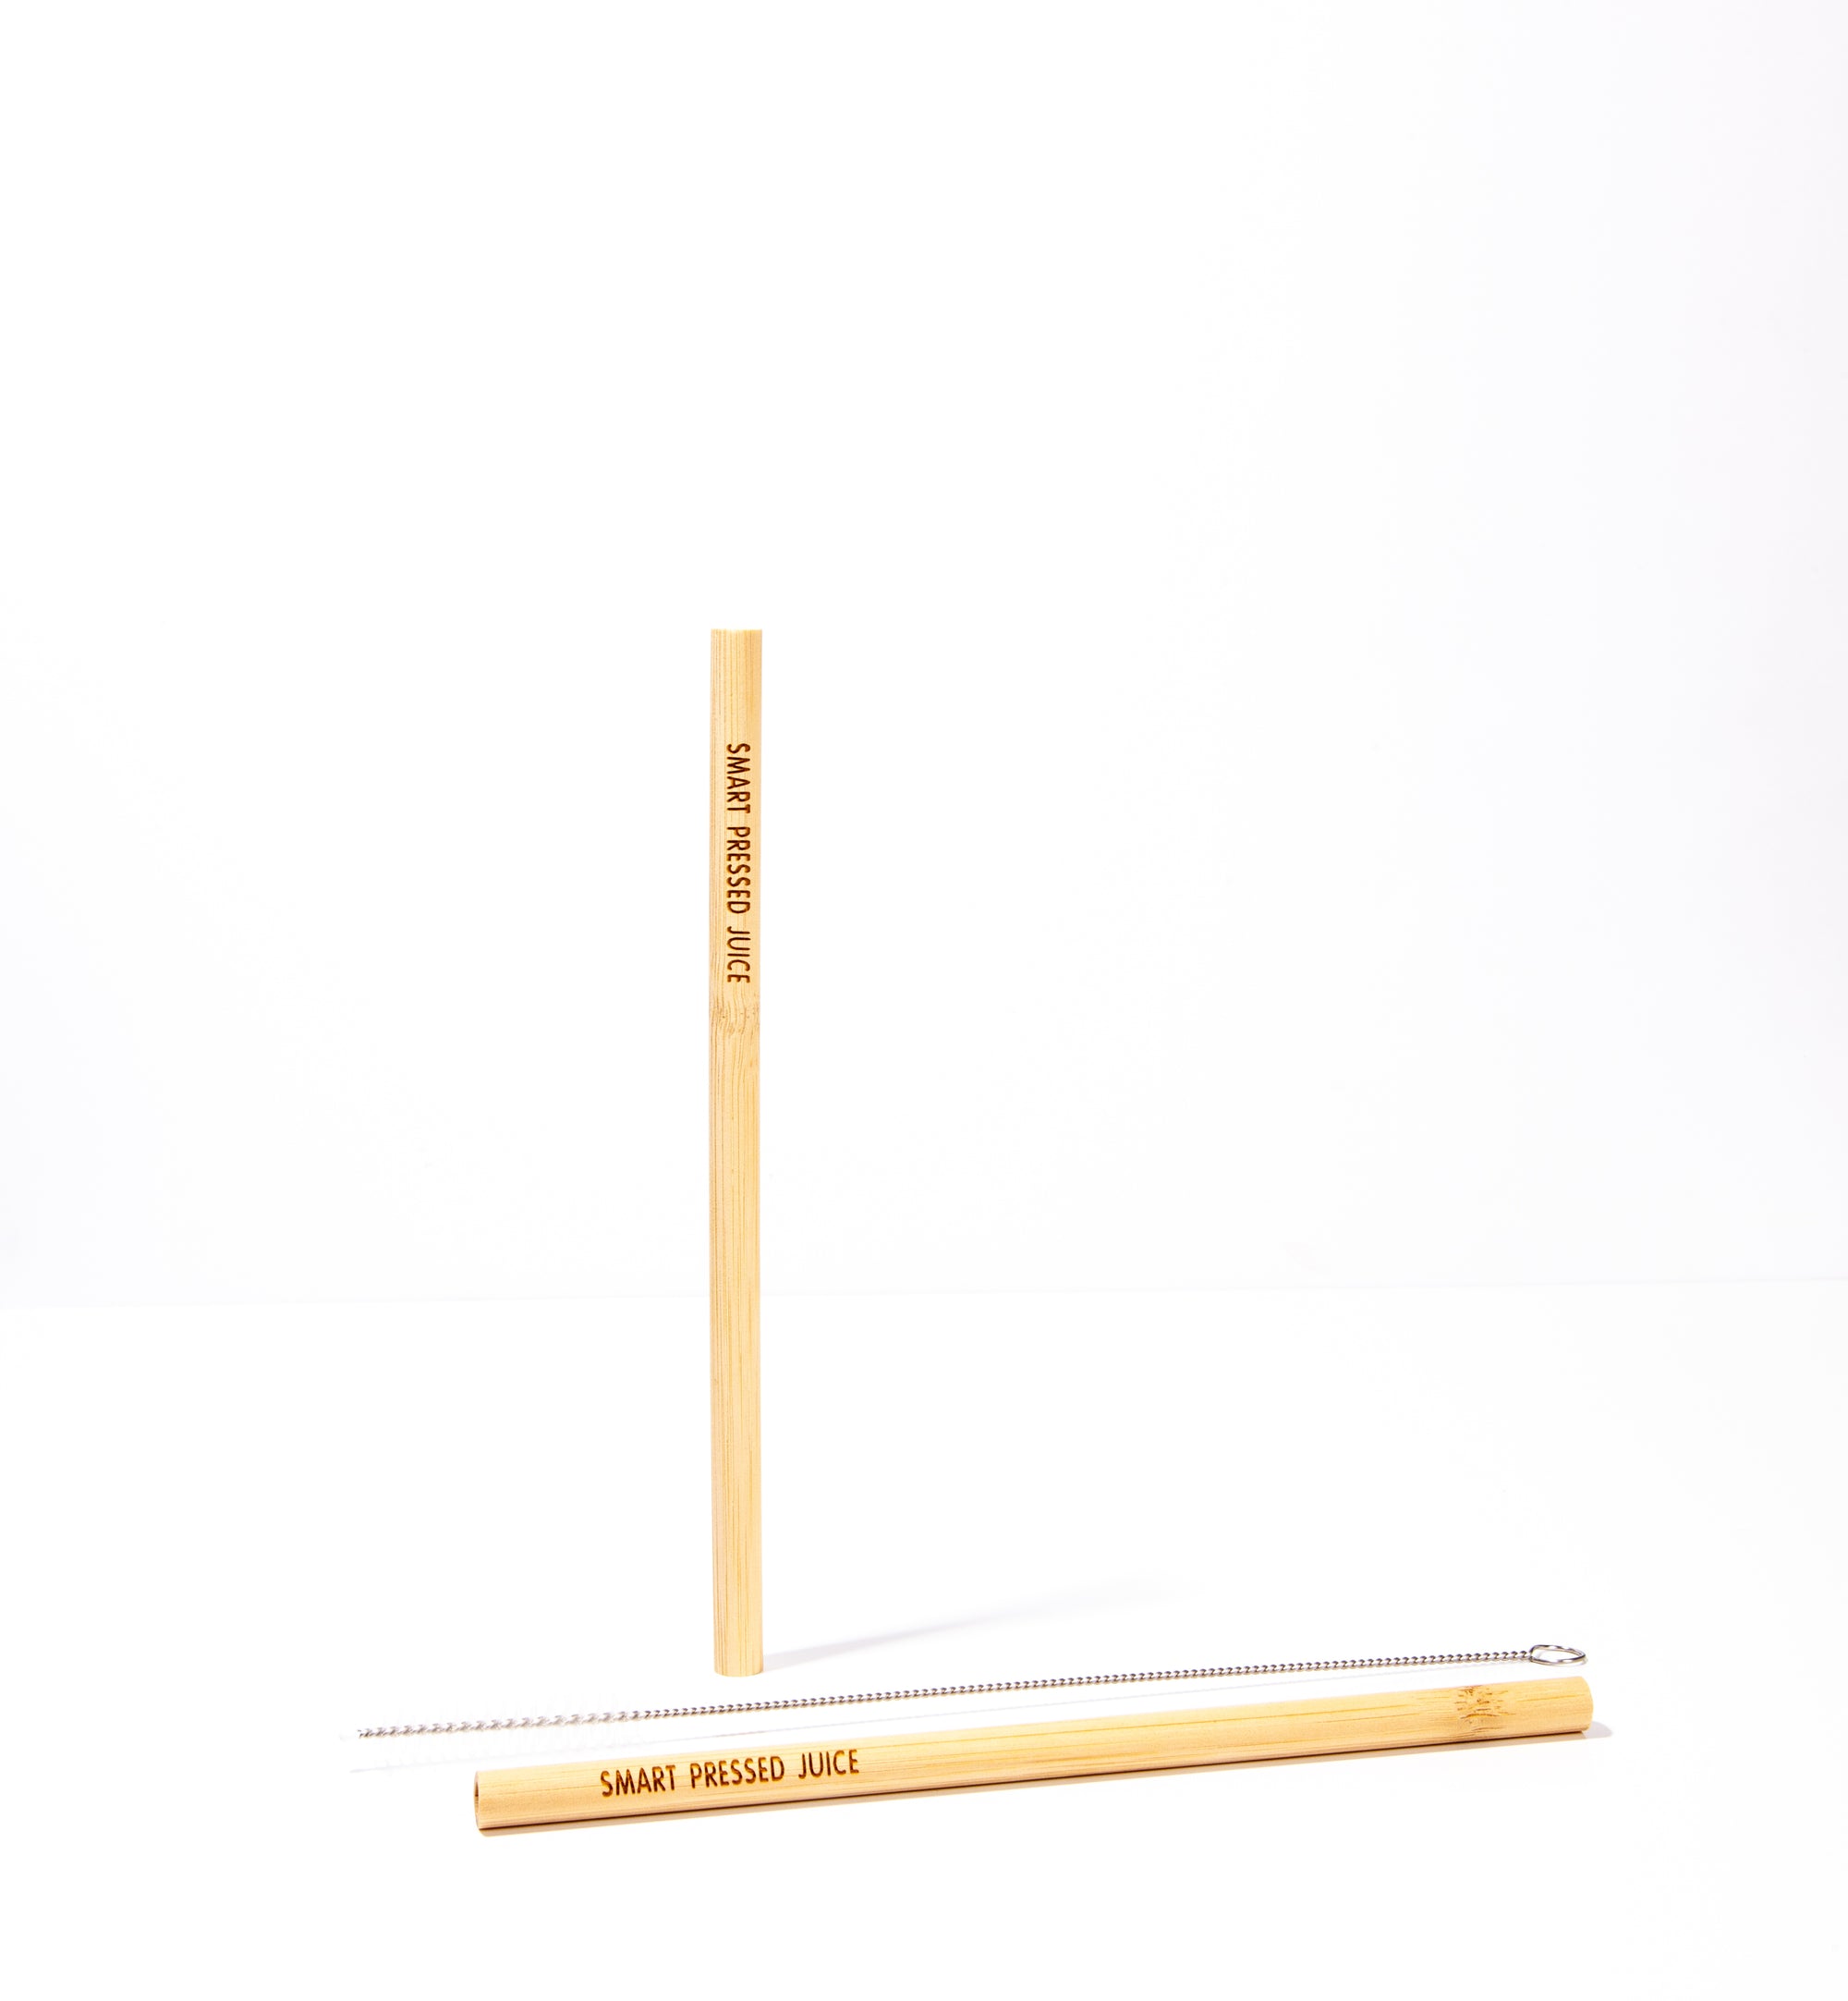 2 bamboo straws- one is in a standing position and the other one is in a laying position against a white background.